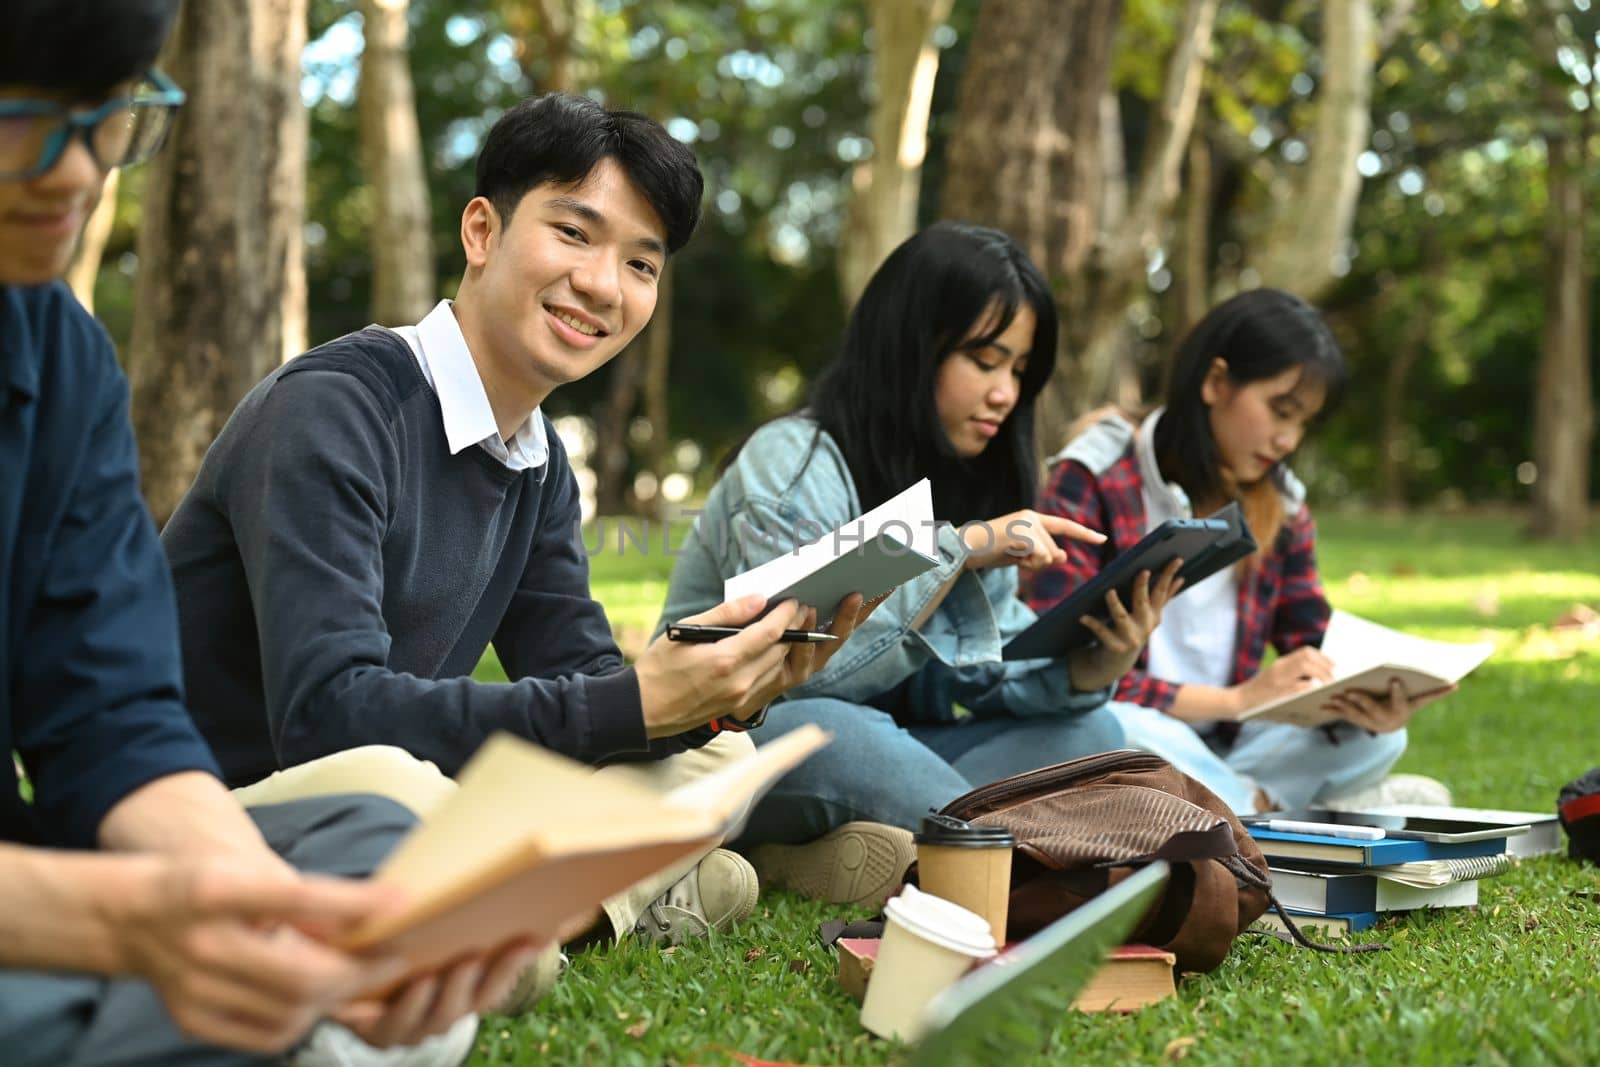 Asian student man reading books, preparing for exam on green lawn at university campus. Youth lifestyle and friendship concept.